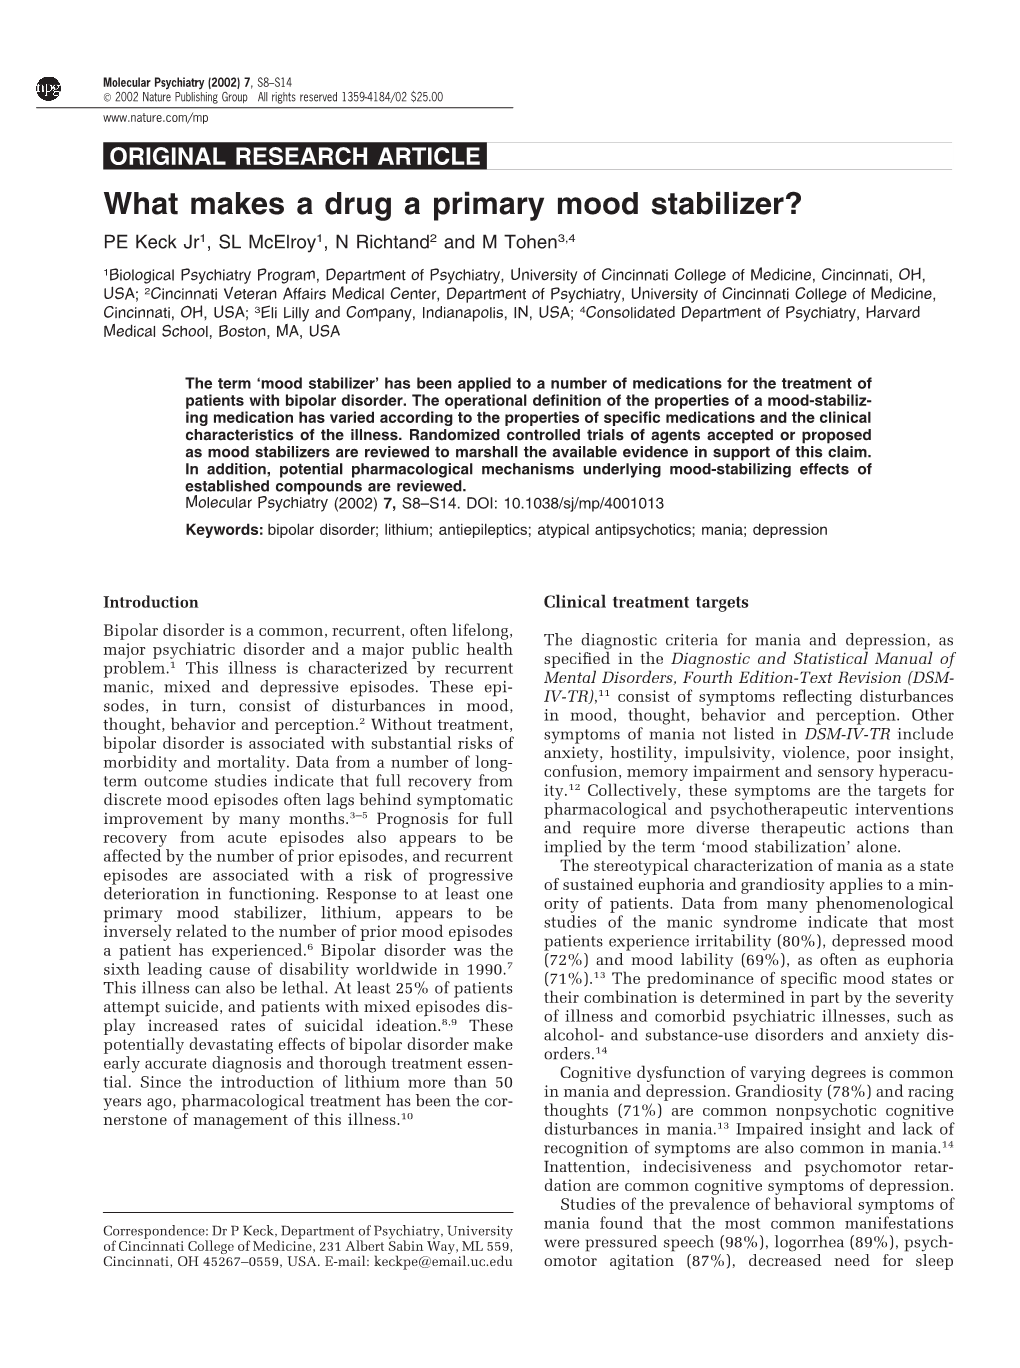 What Makes a Drug a Primary Mood Stabilizer? PE Keck Jr1, SL Mcelroy1, N Richtand2 and M Tohen3,4